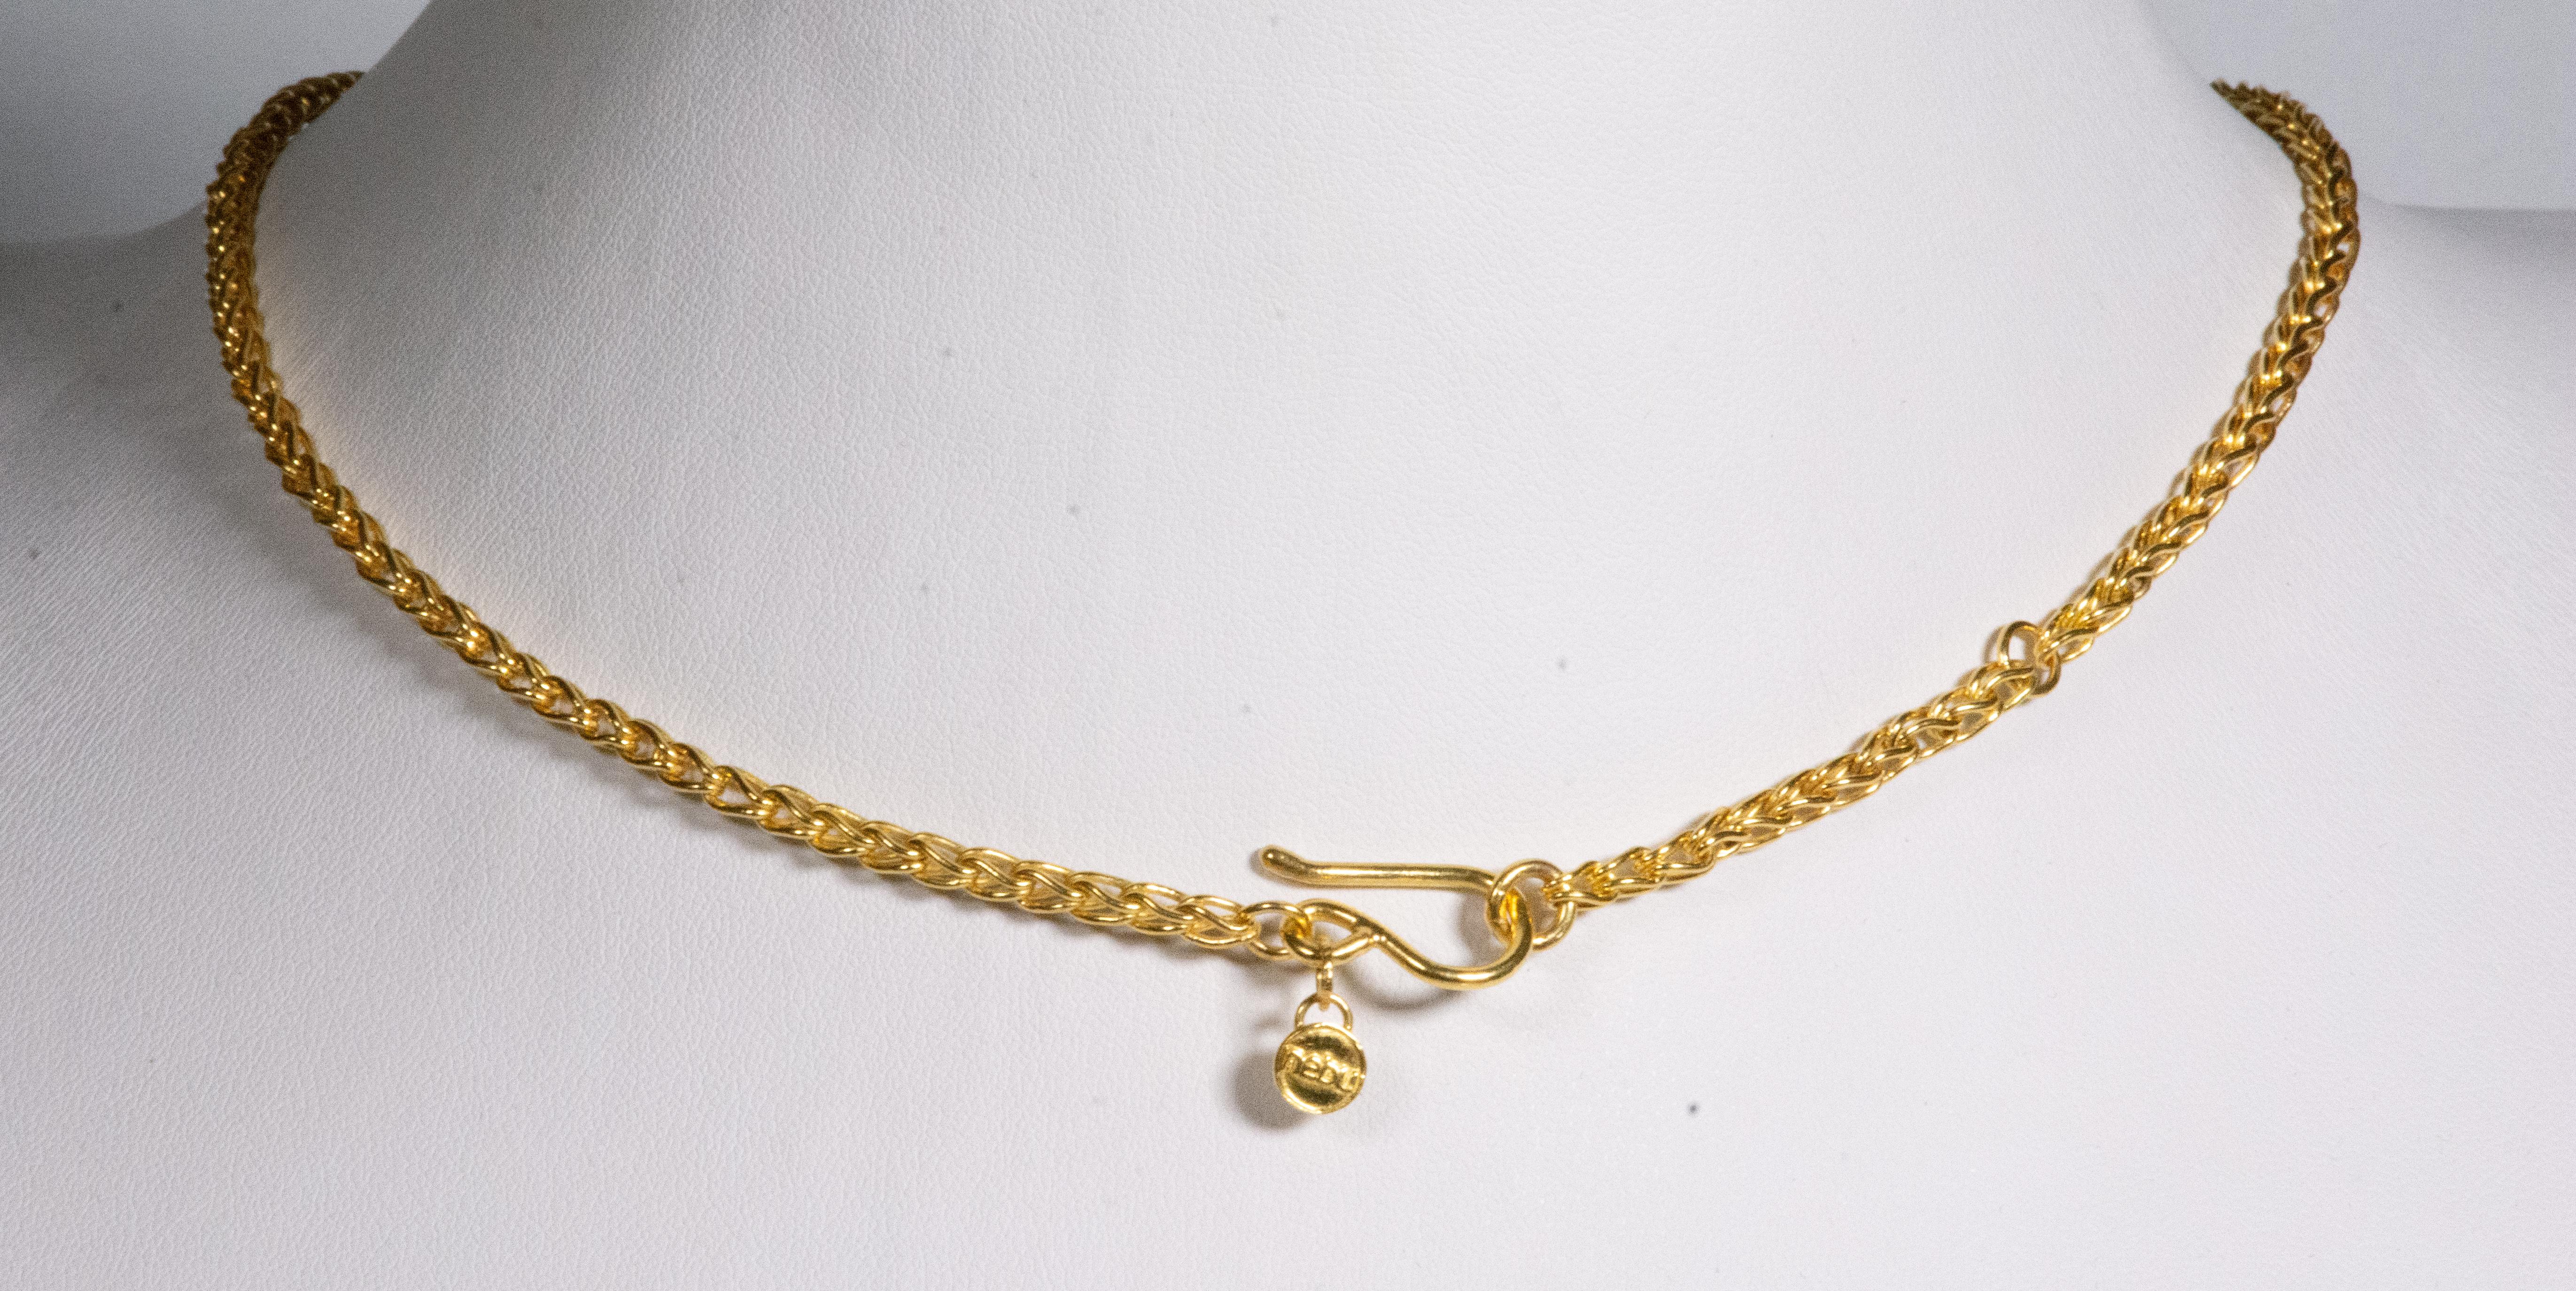 -Available
-Handmade
-22K gold
-Sapphire stone
-Loop in loop chain
-S-Clasp
-Can be adjusted  as 17.5 inch or 18 inch chain
-Stamped with the Nebu logo

Introducing the exquisite 